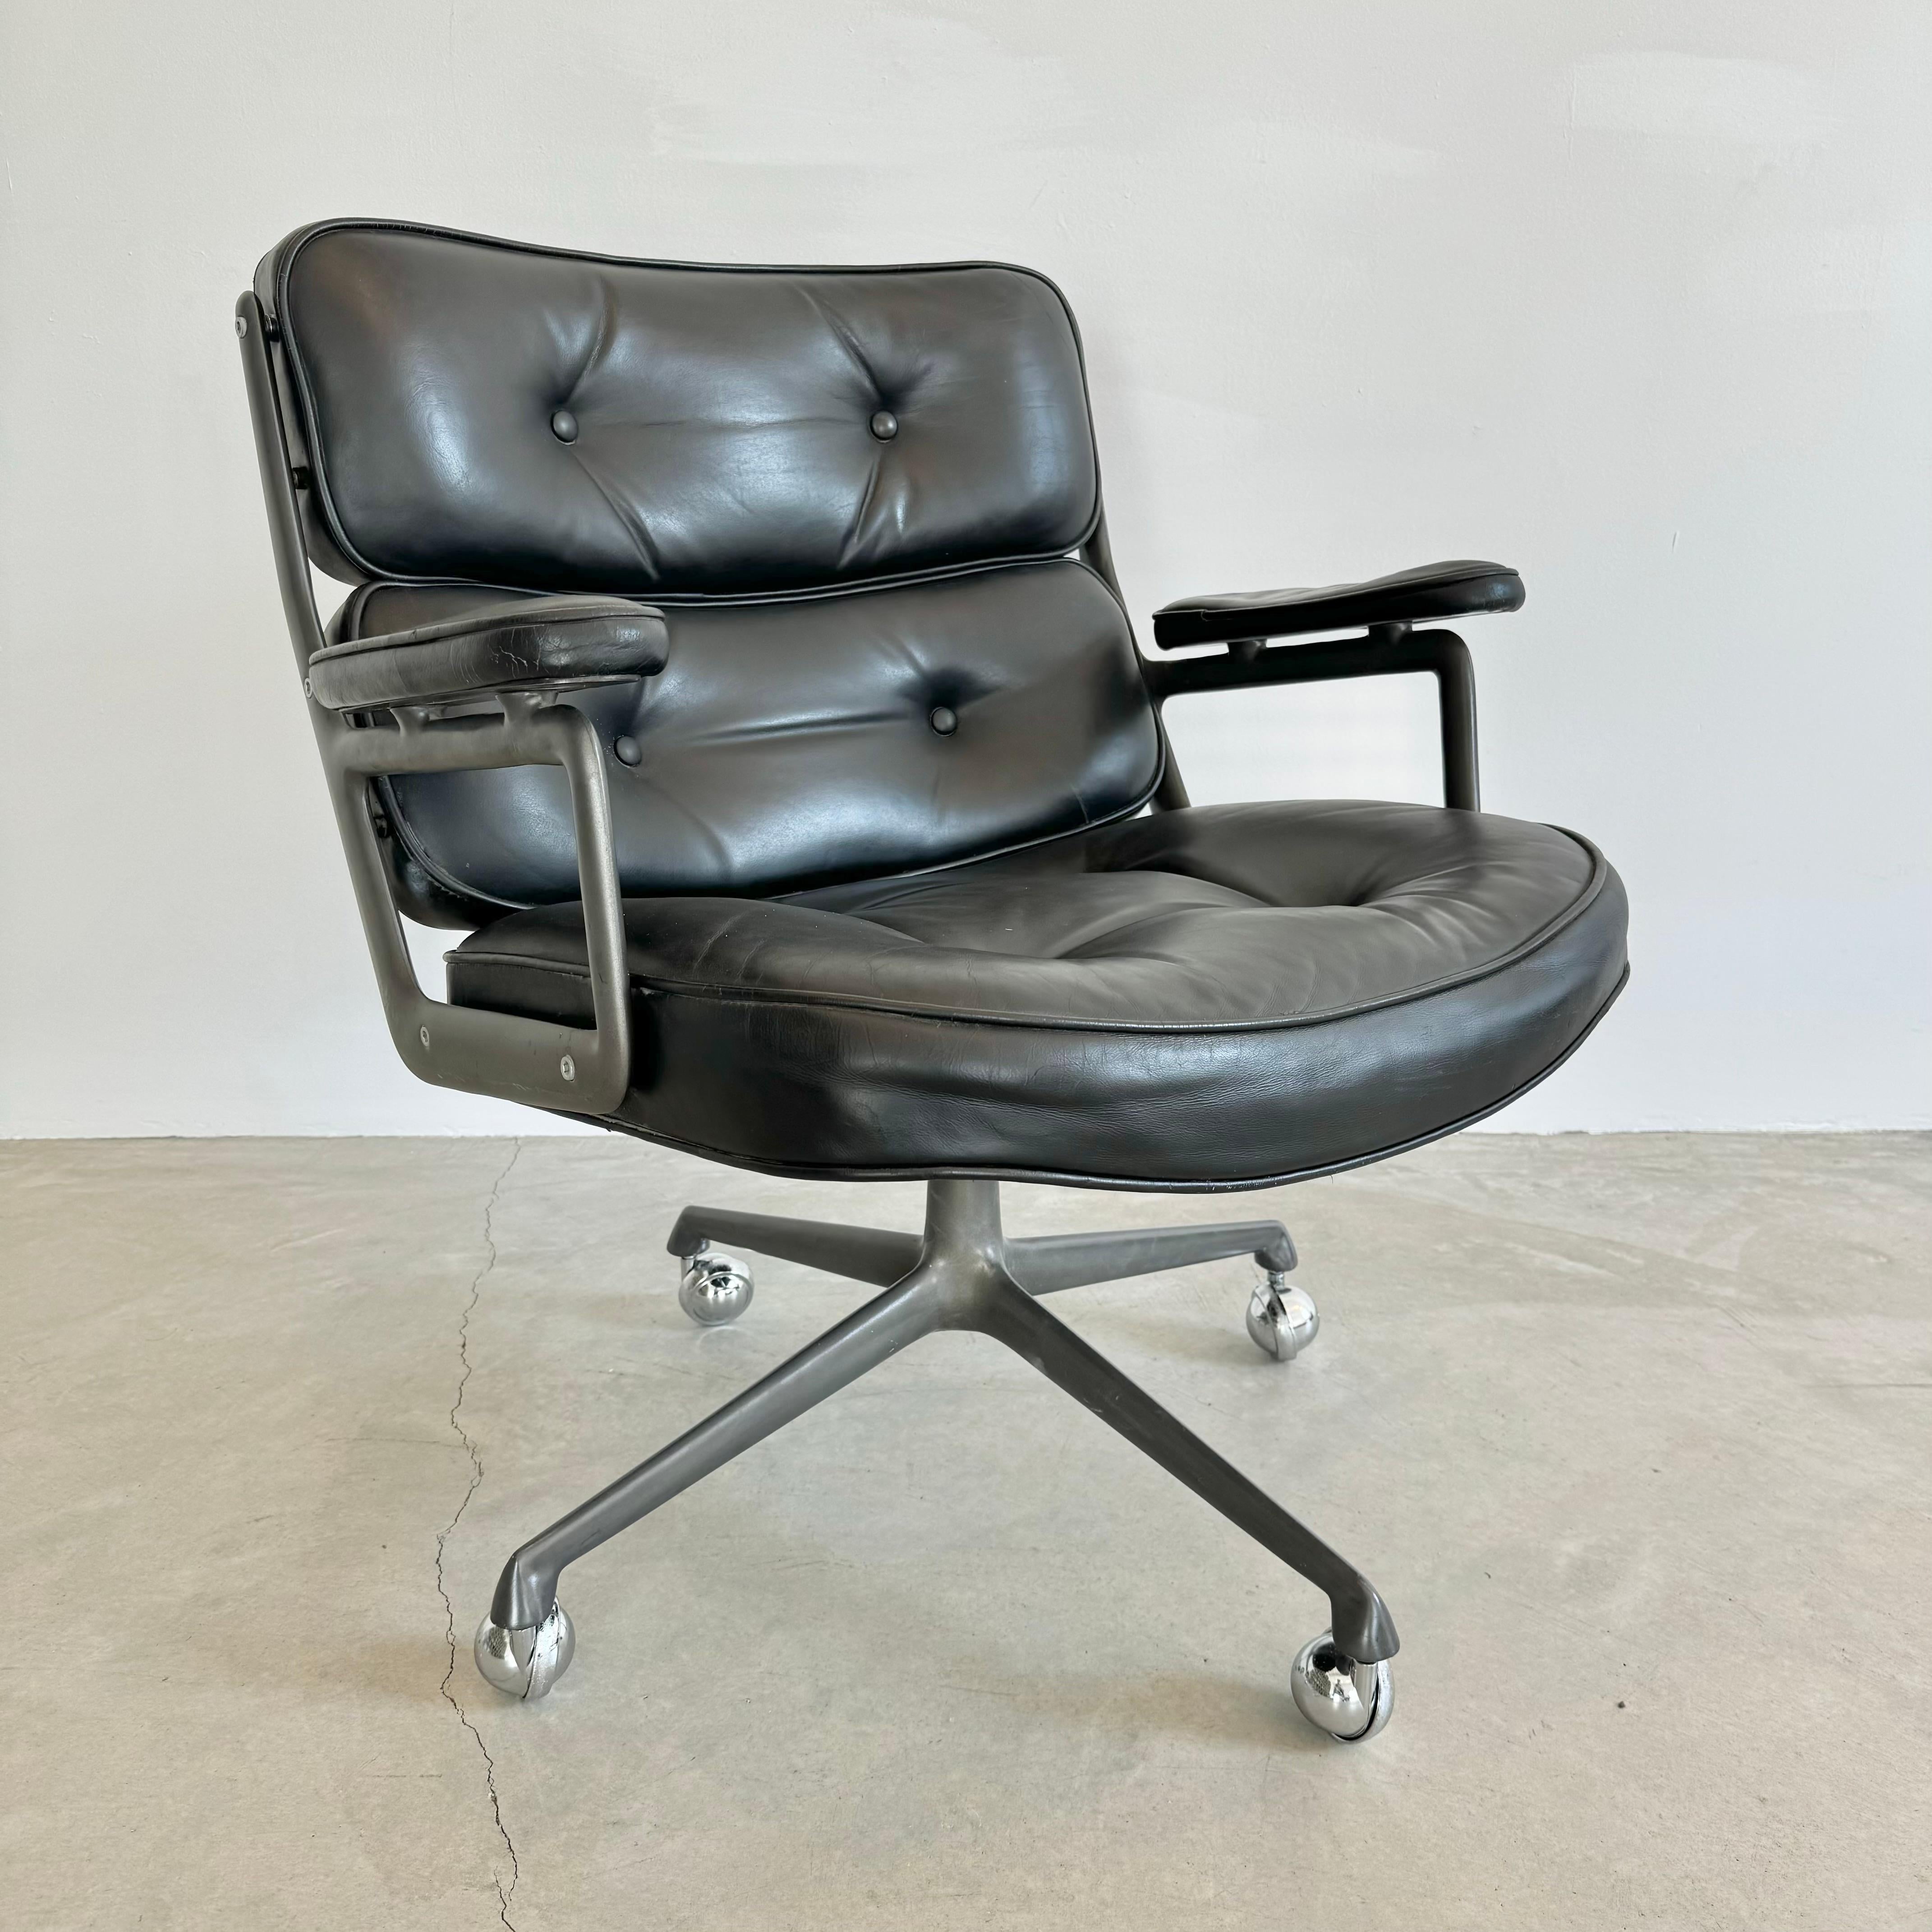 Eames Time Life Lobby Lounge Chair in Black Leather for Herman Miller, 1980s USA For Sale 3